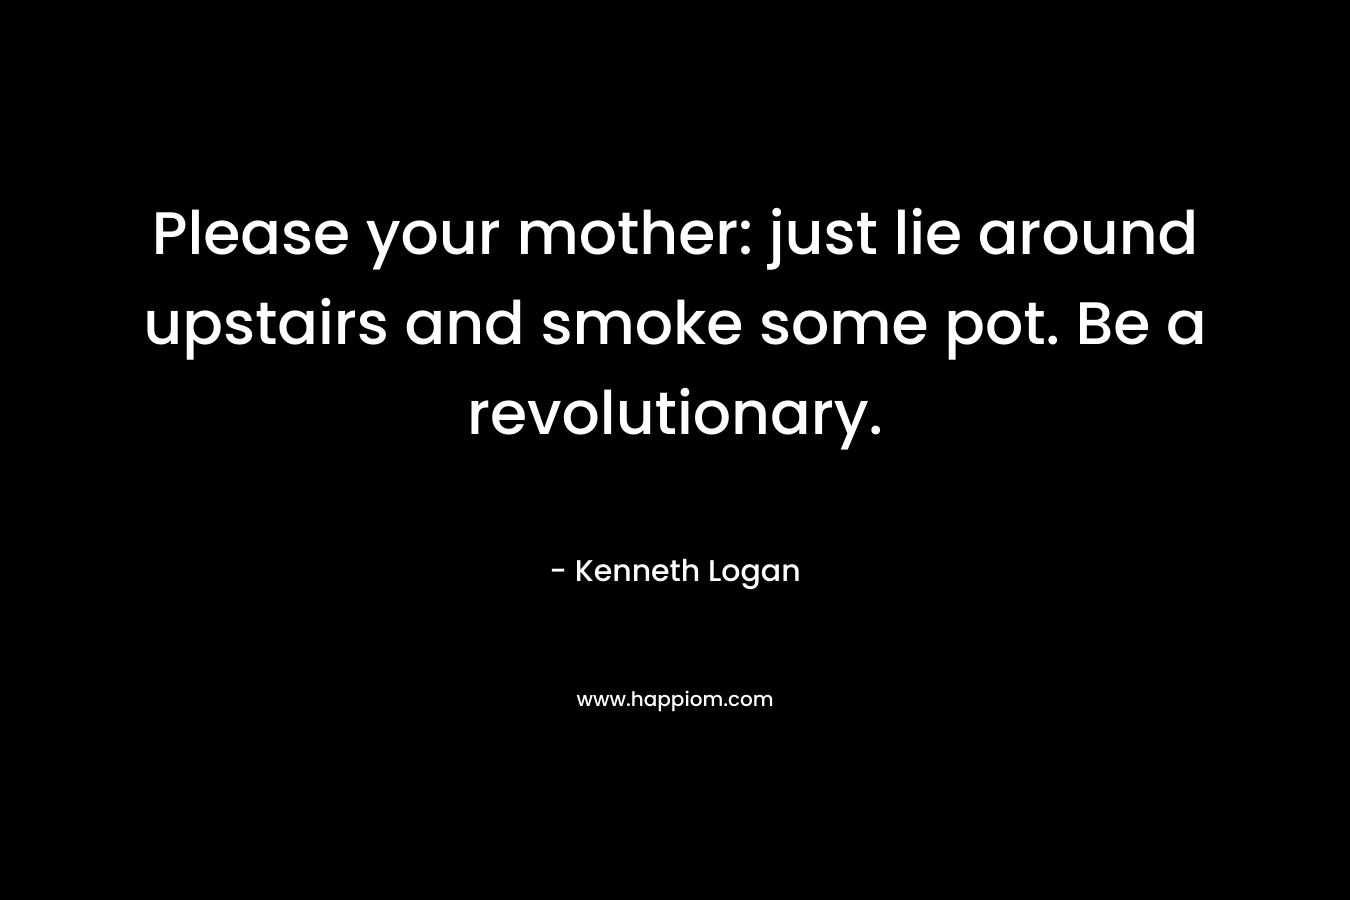 Please your mother: just lie around upstairs and smoke some pot. Be a revolutionary. – Kenneth Logan